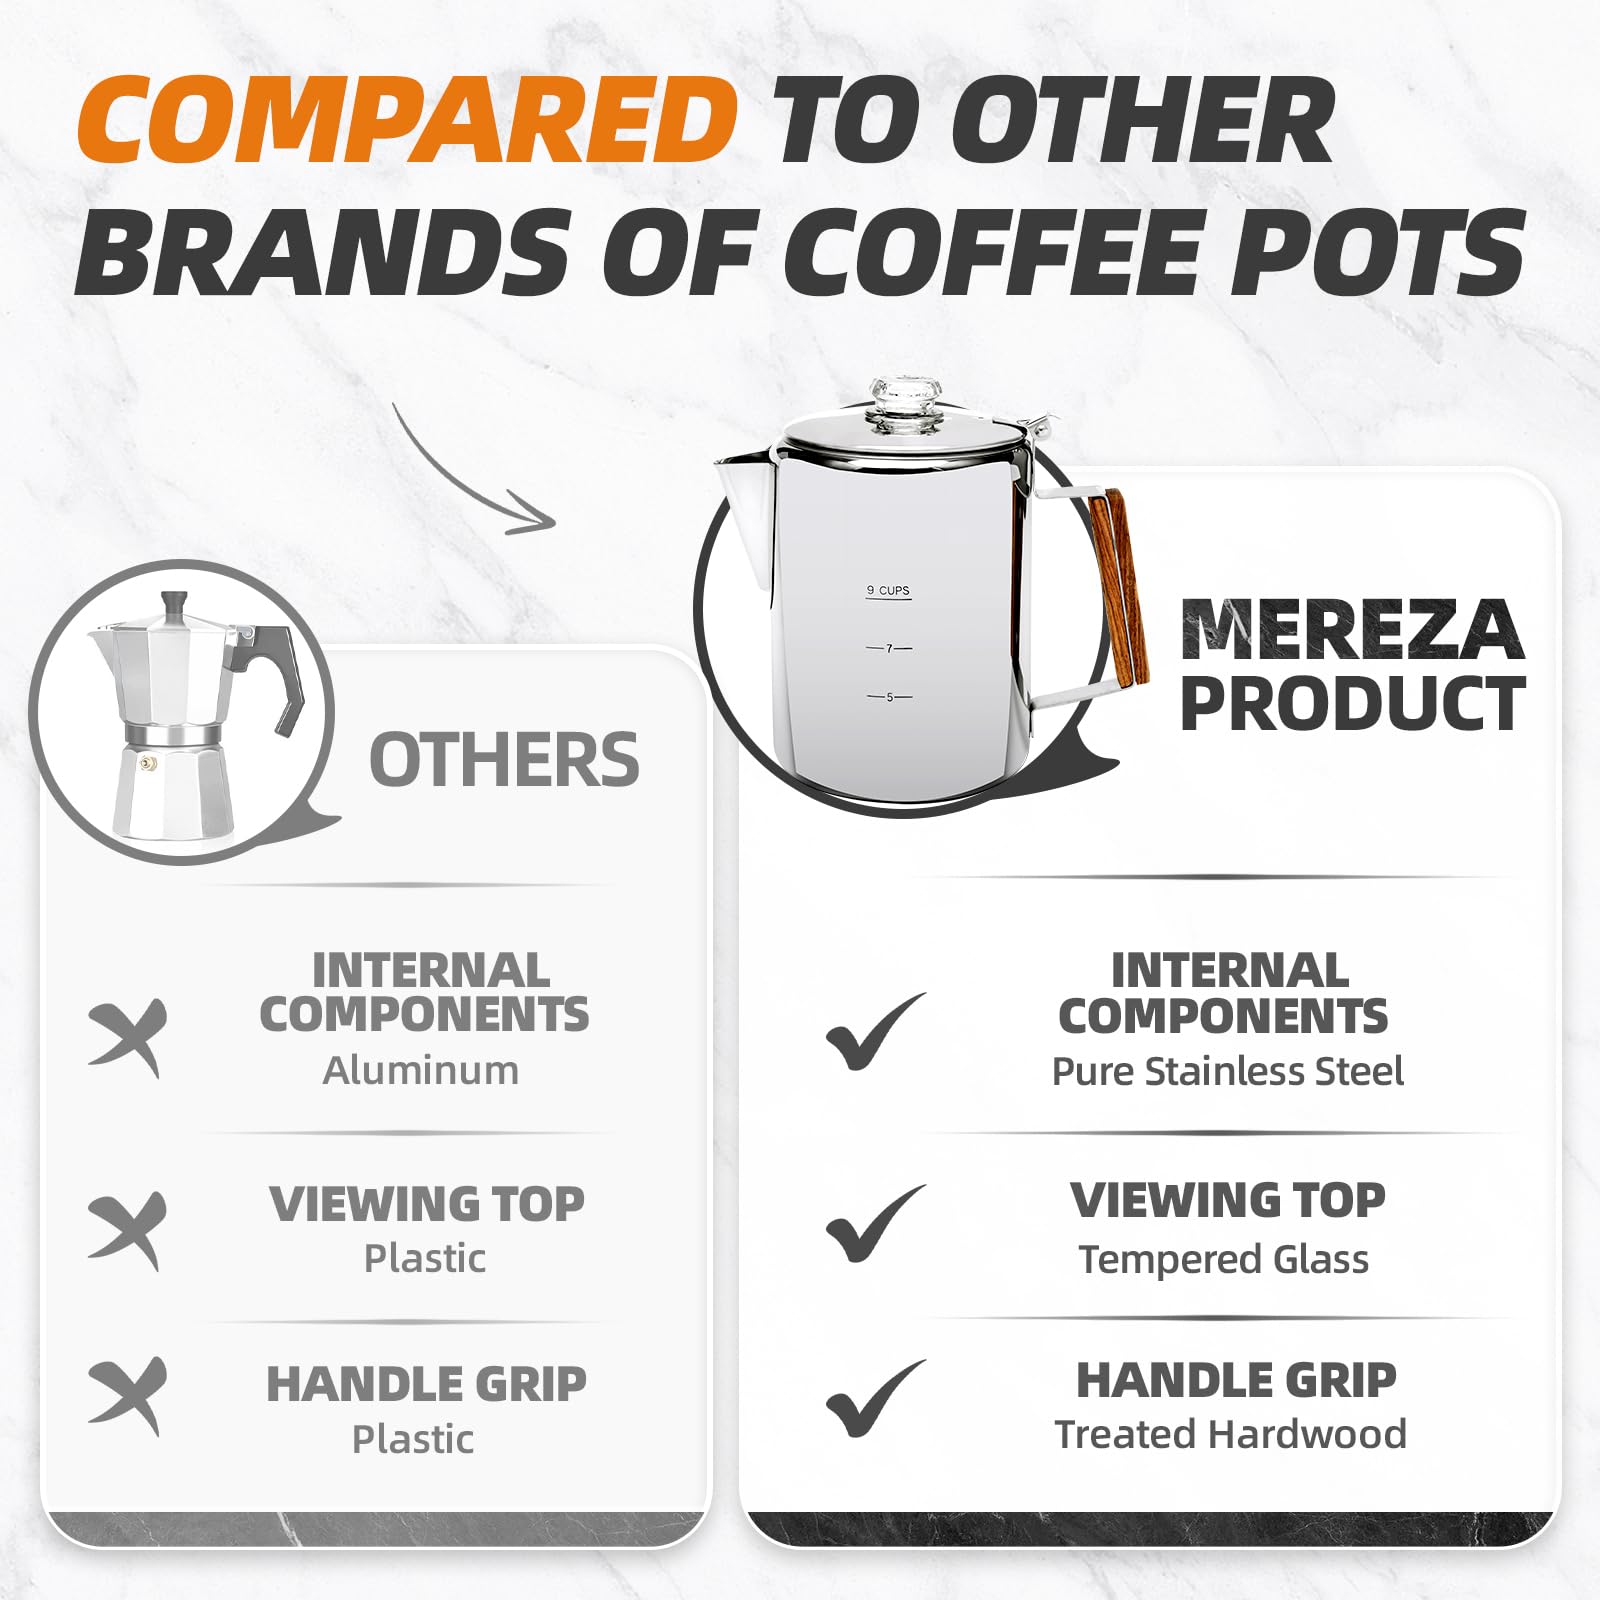 MEREZA Camping Coffee Pot Stovetop Coffee Maker Percolator Campfire Coffee Pot Stainless Steel Coffee Pot Camping Outdoors Home 9 Cup No Aluminum & Plastic Fast Brew